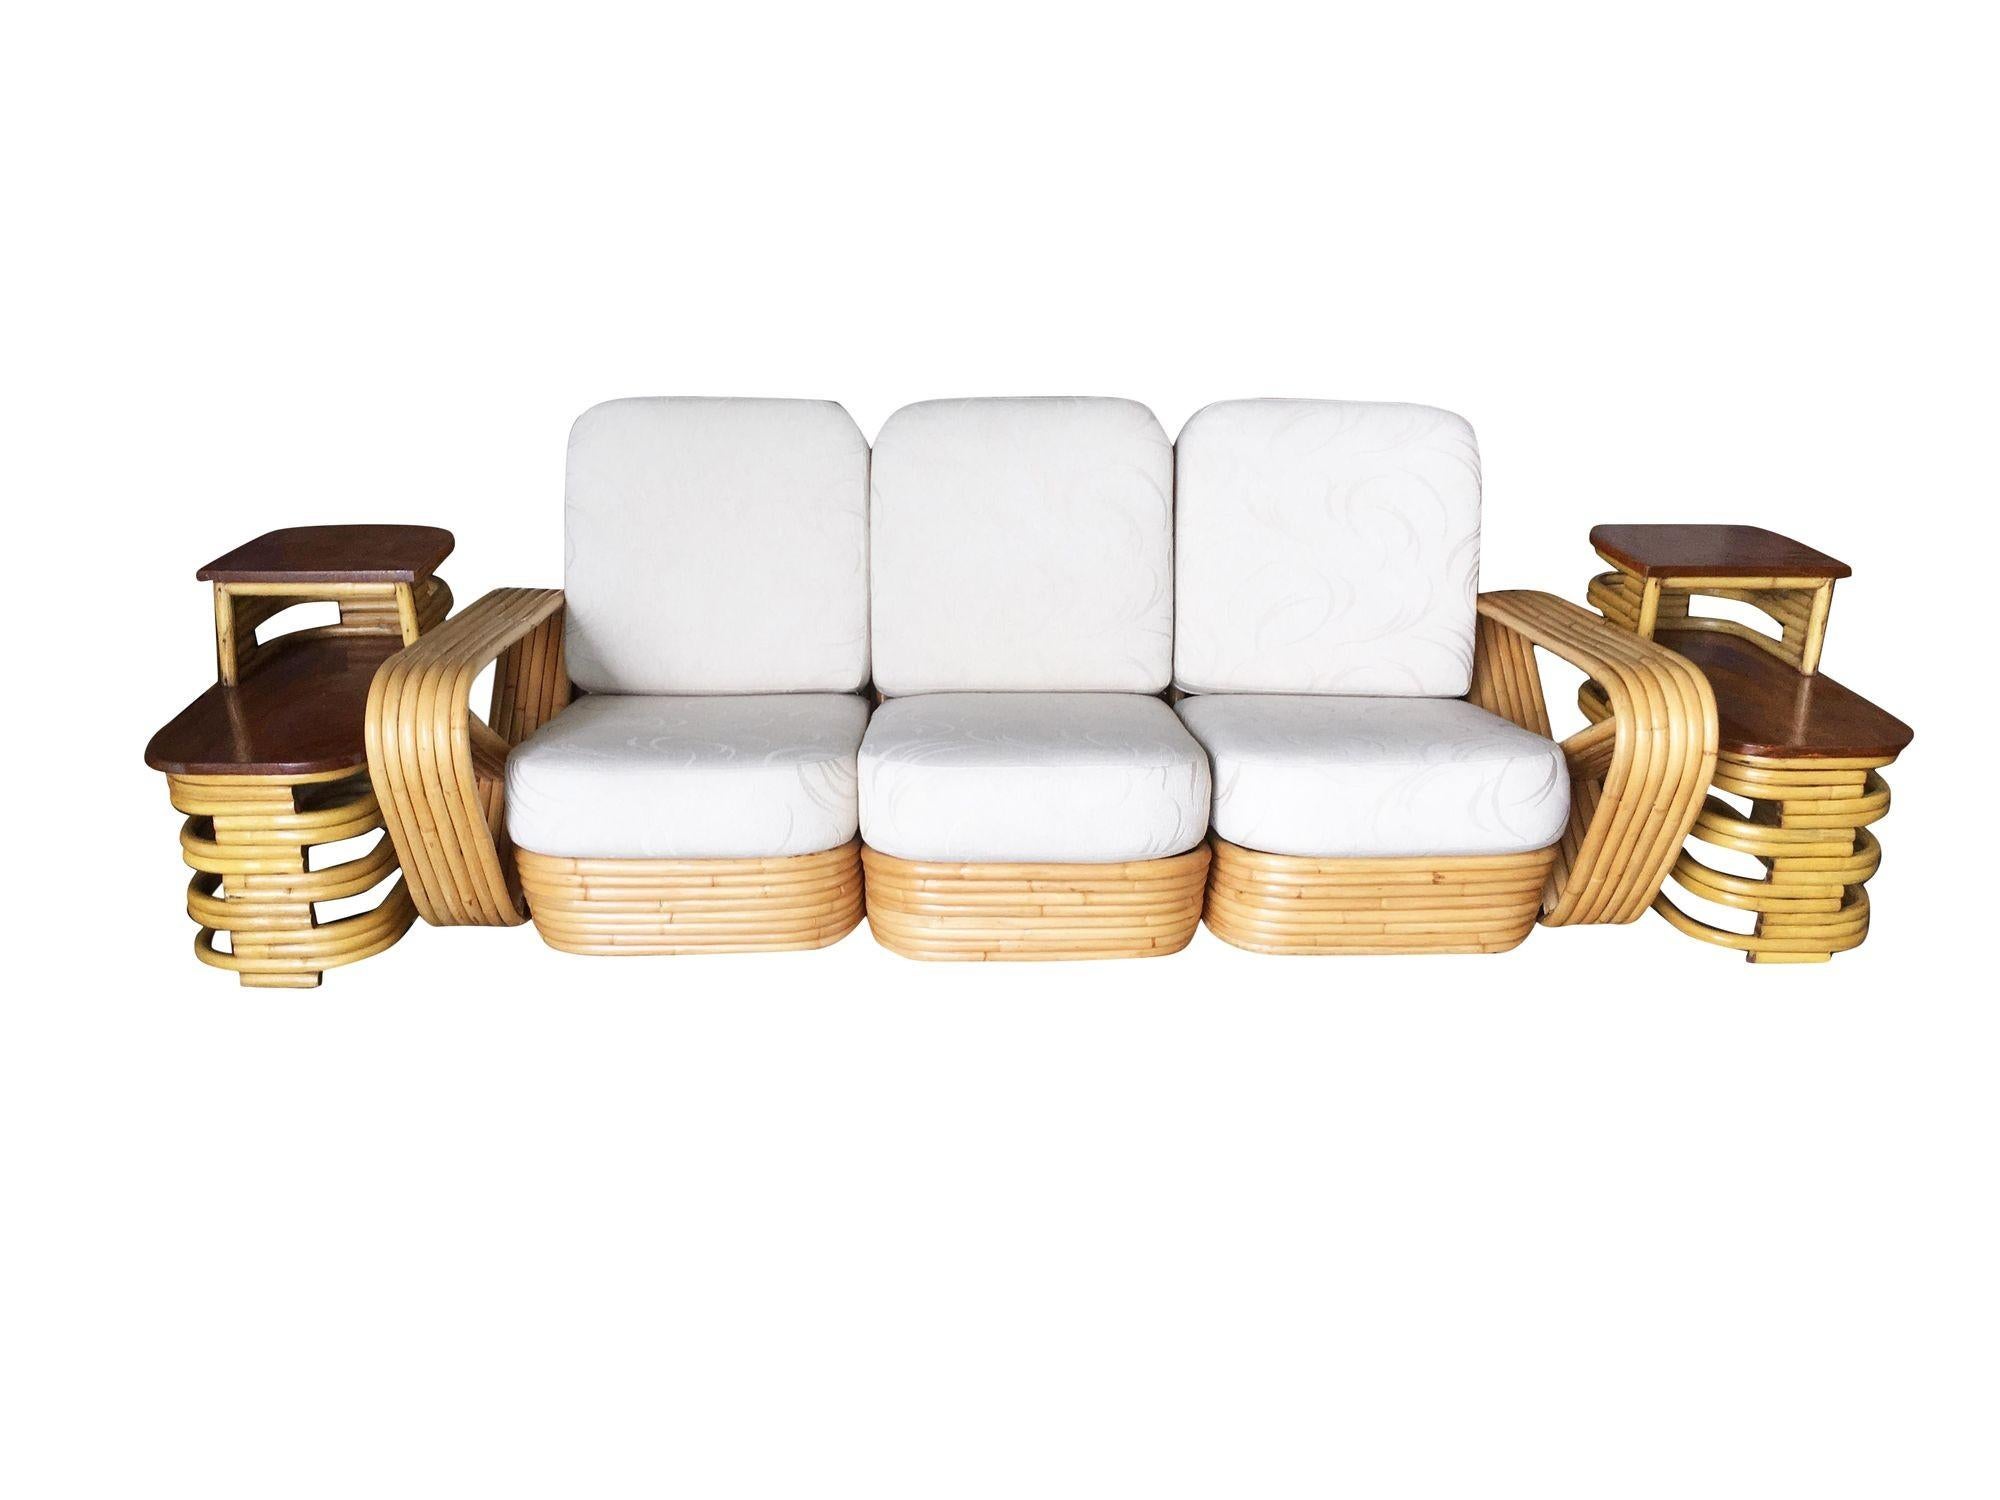  Restored Paul Frankl Six-Strand Sectional Sofa Living-Room Set with Side Tables For Sale